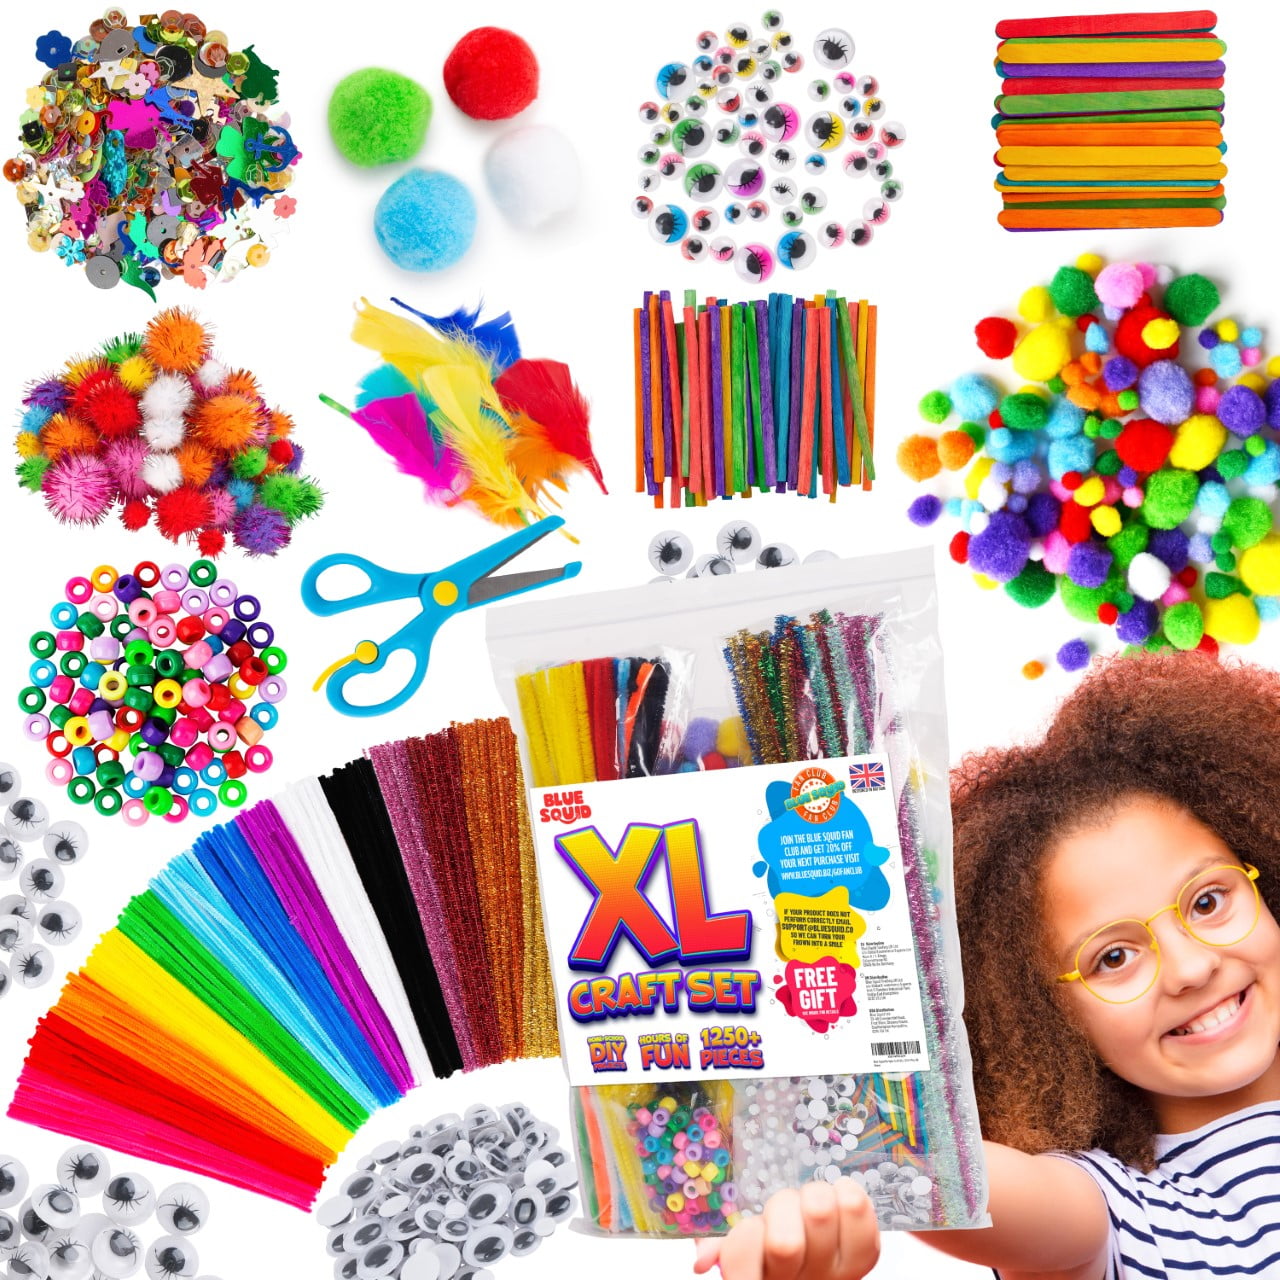 Buy Blue SquidArts and Crafts for Kids – XXXL Craft Kit for Kids - 2000+  Pcs Kids Craft Kits, Arts & Craft Supplies for Toddlers, Kids Art Set Craft  Box, Art Kit